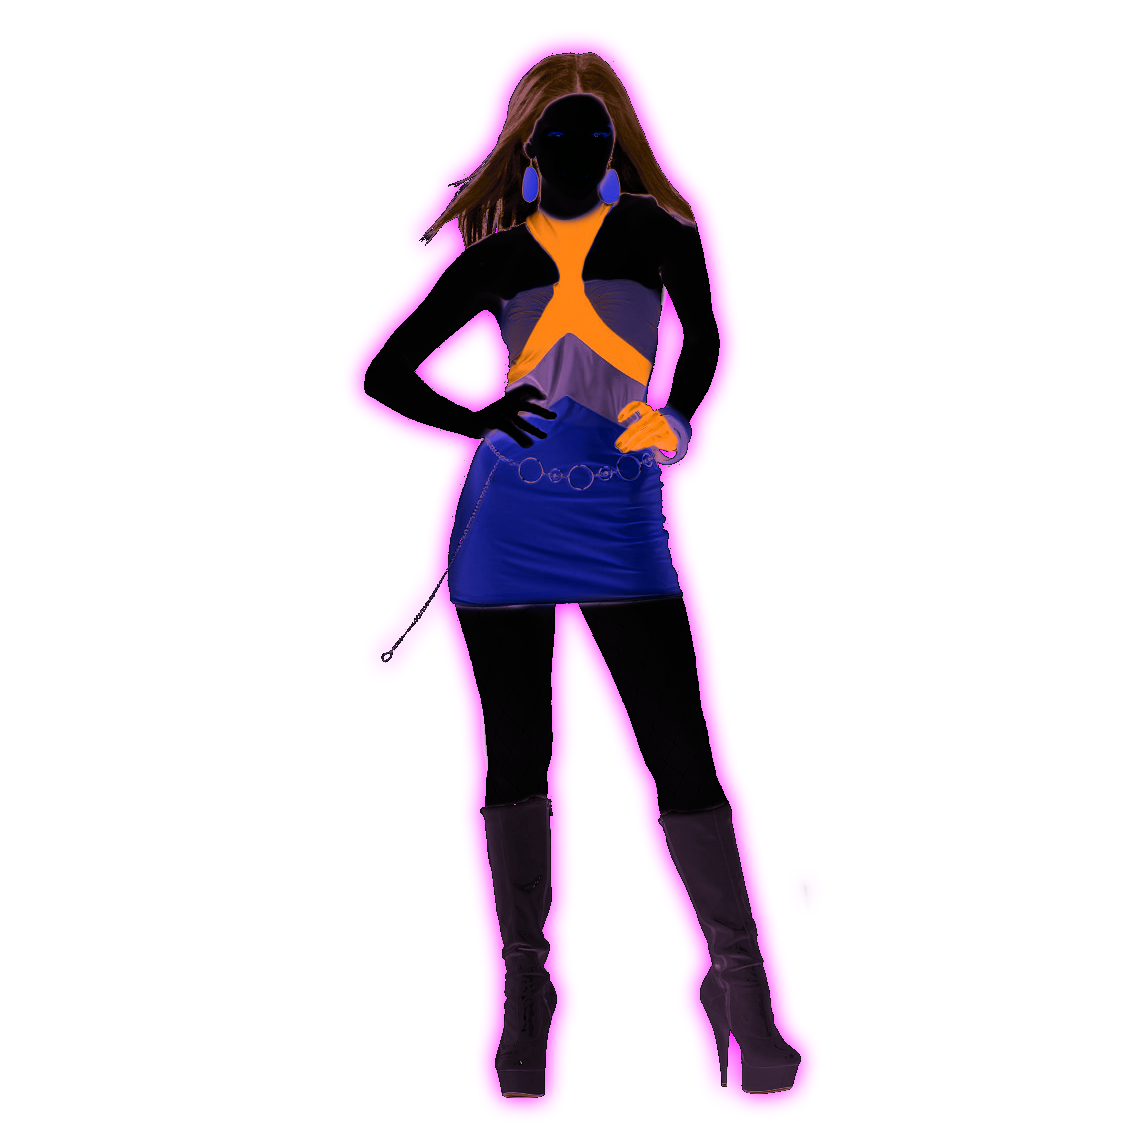 Dance Girl Picture HQ Image Free PNG PNG Image